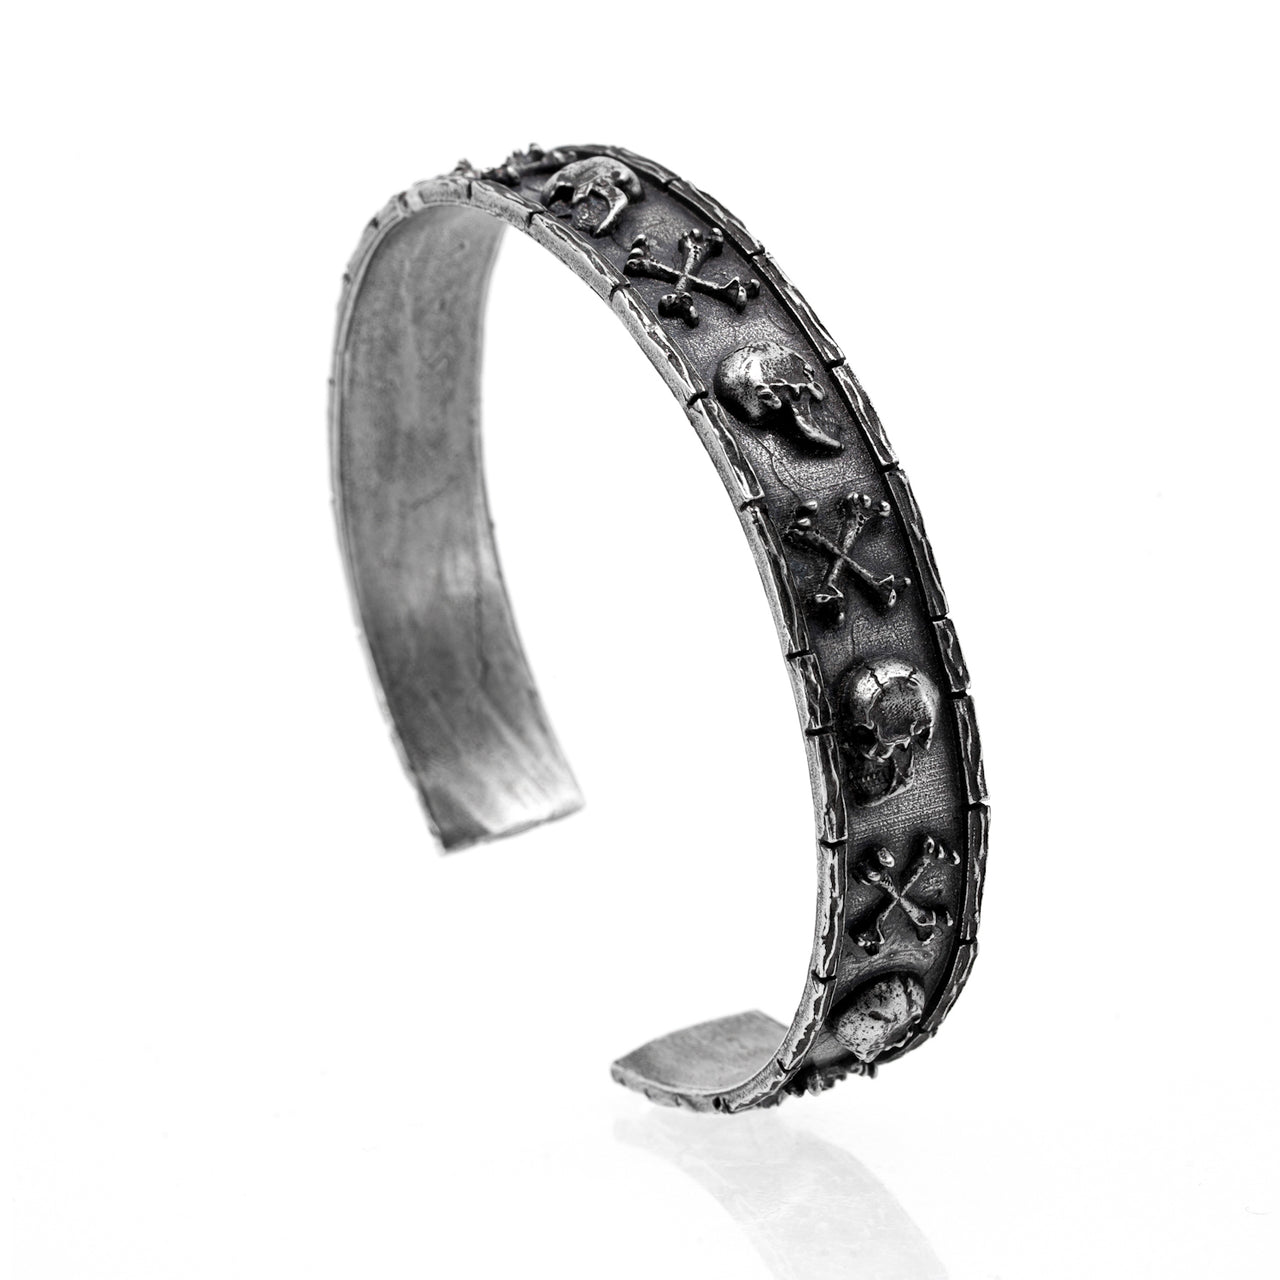 Catacomb cuff bracelet - Sterling Silver - Black Feather Design